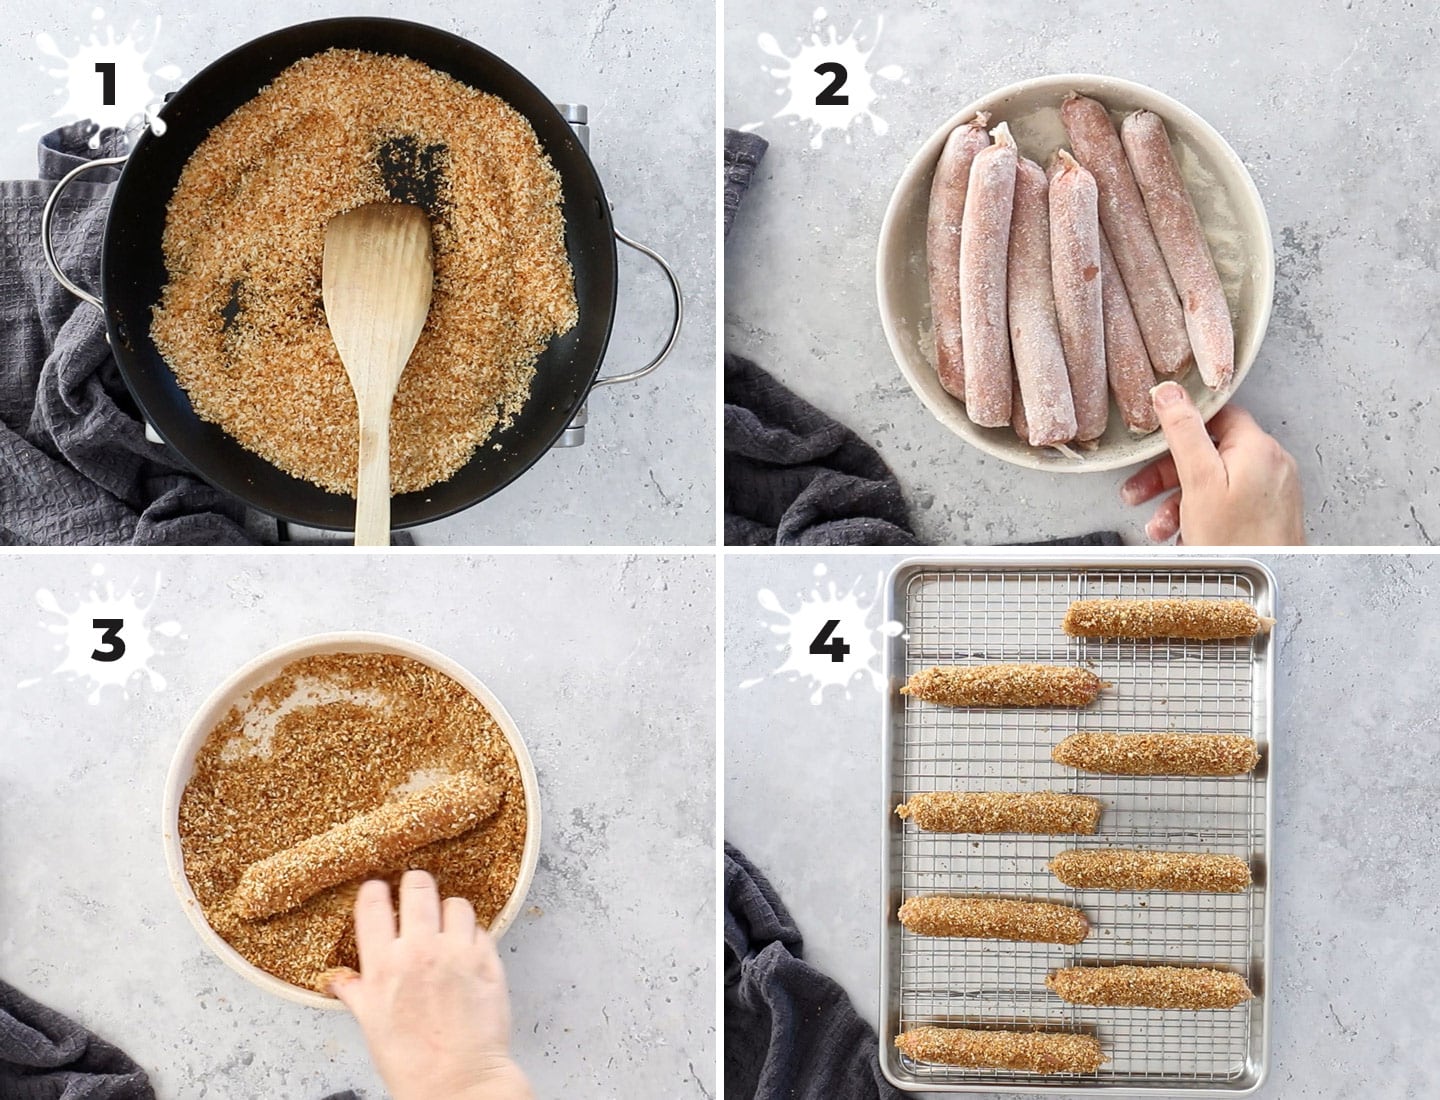 A collage of 4 images showing how to make crumbed sausages from scratch.